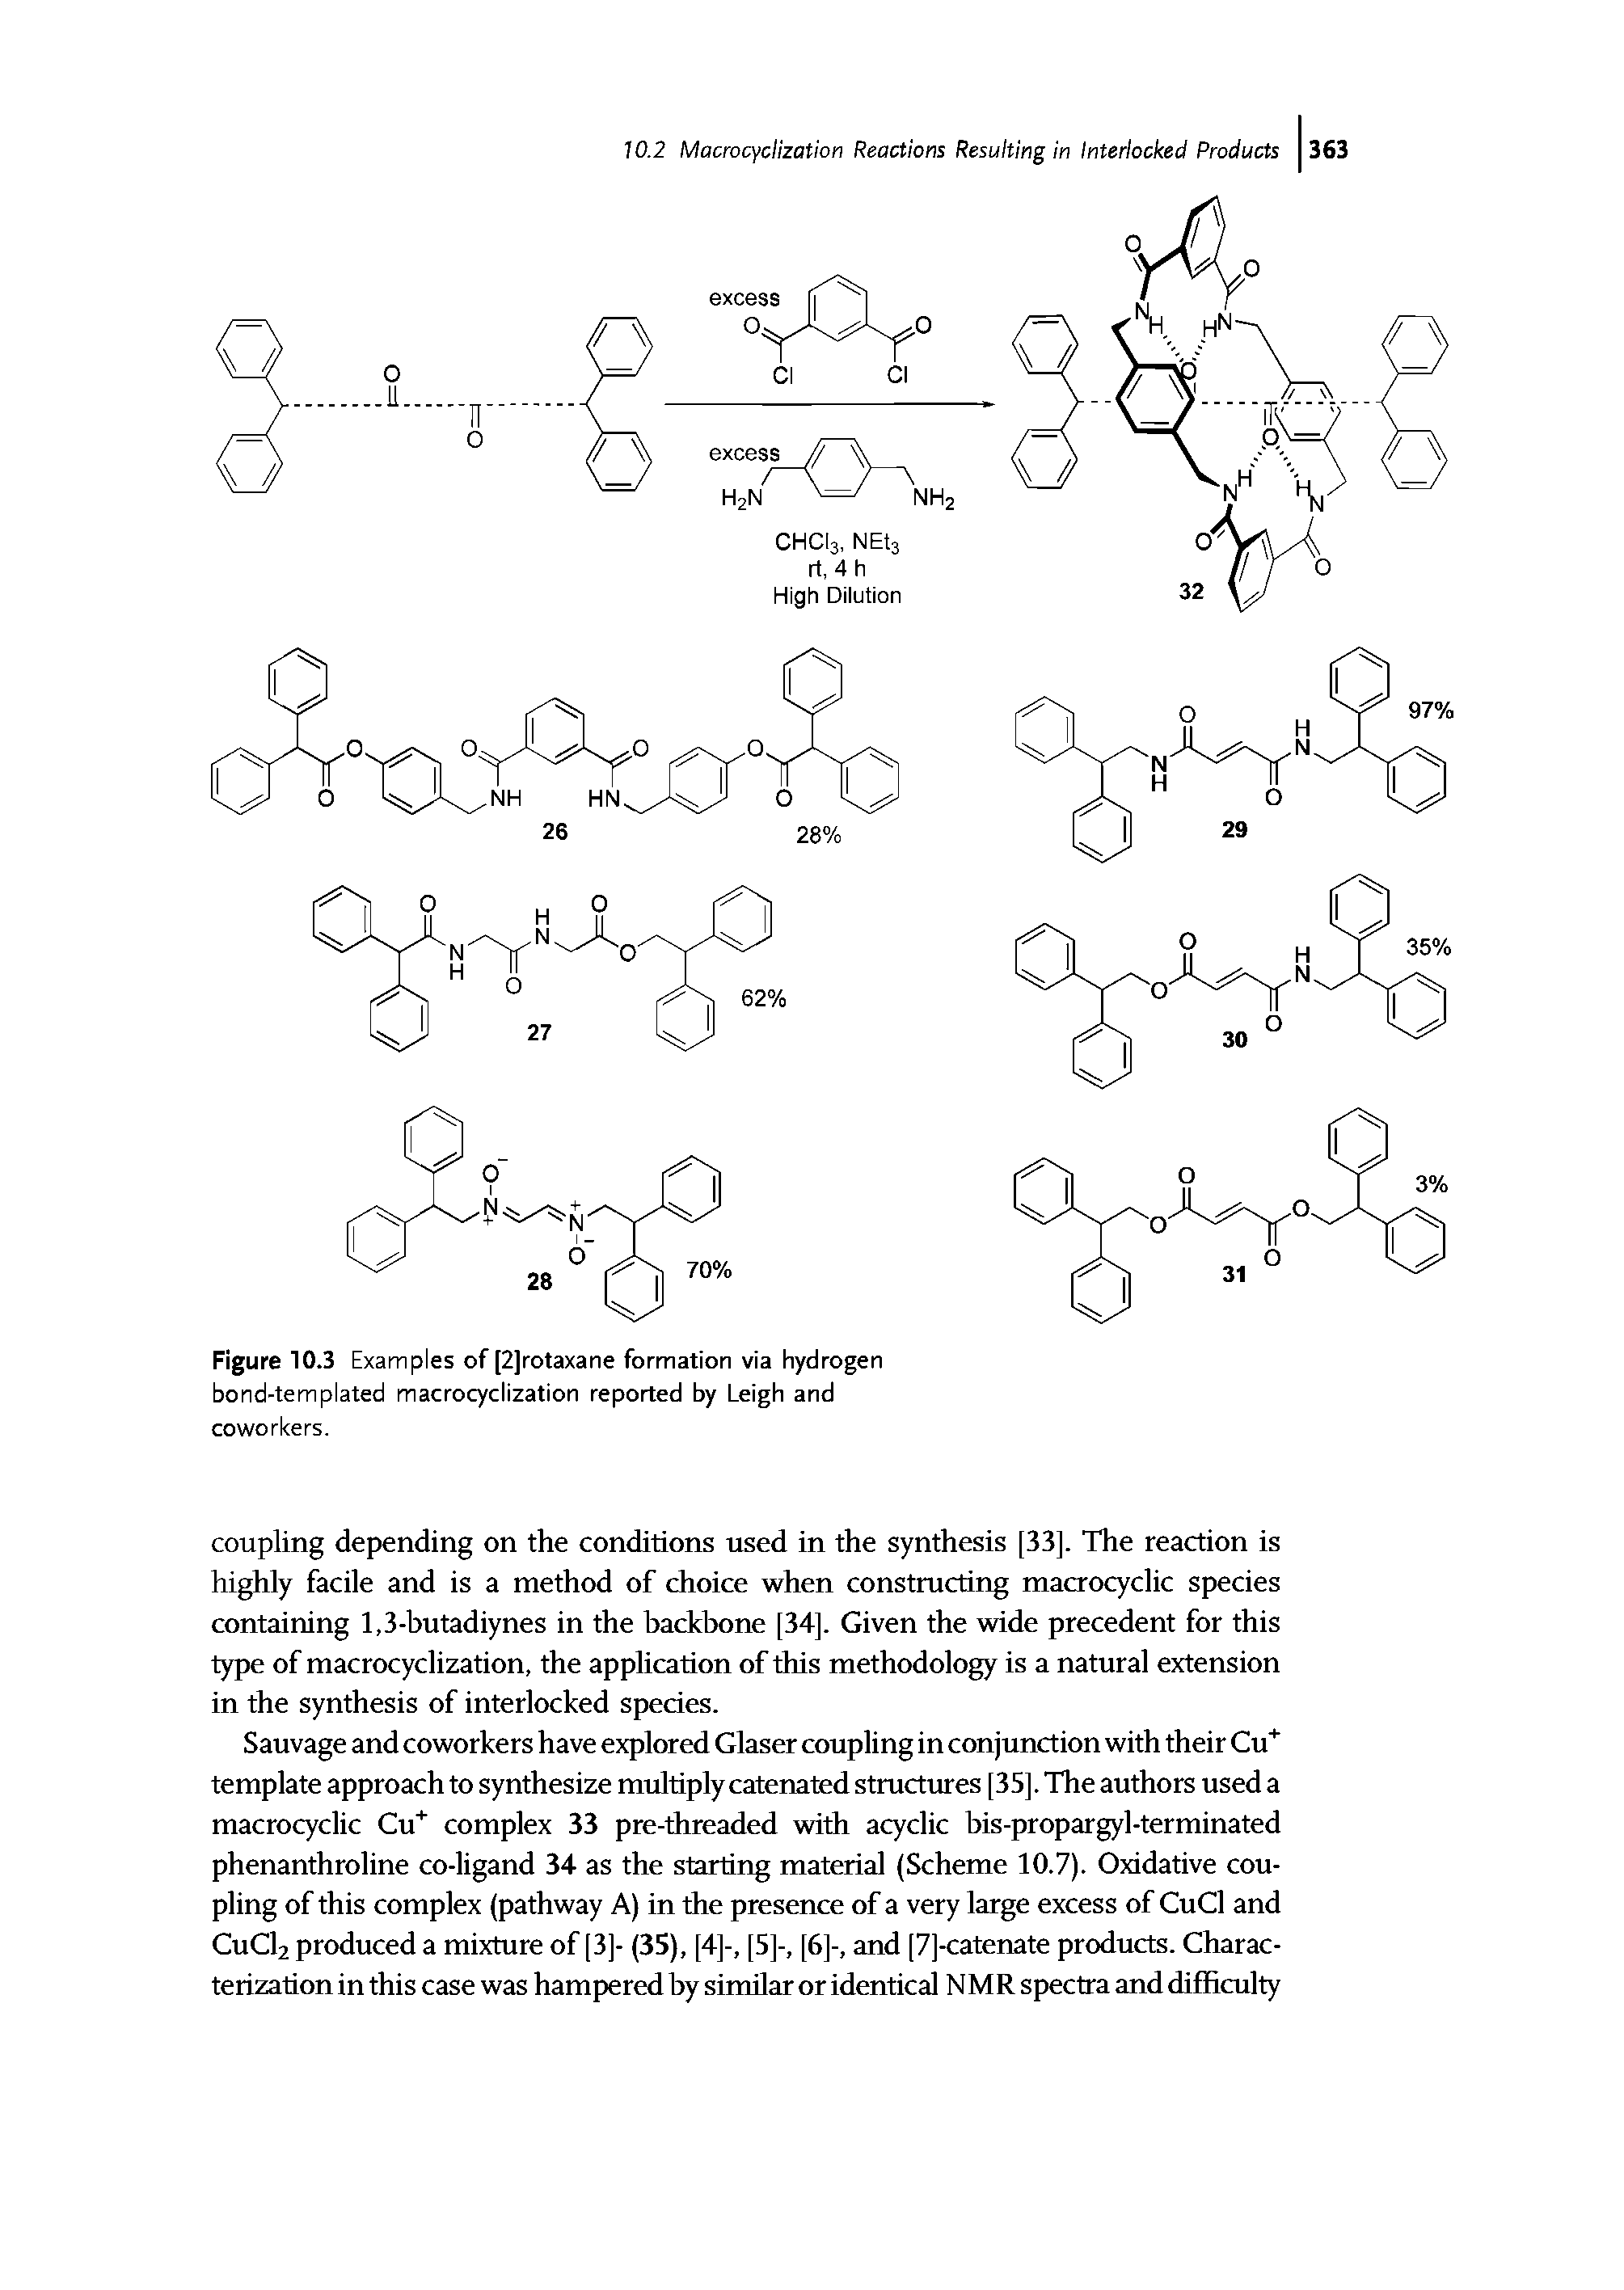 Figure 10.3 Examples of [2]rotaxane formation via hydrogen bond-templated macrocyclization reported by Leigh and coworkers.